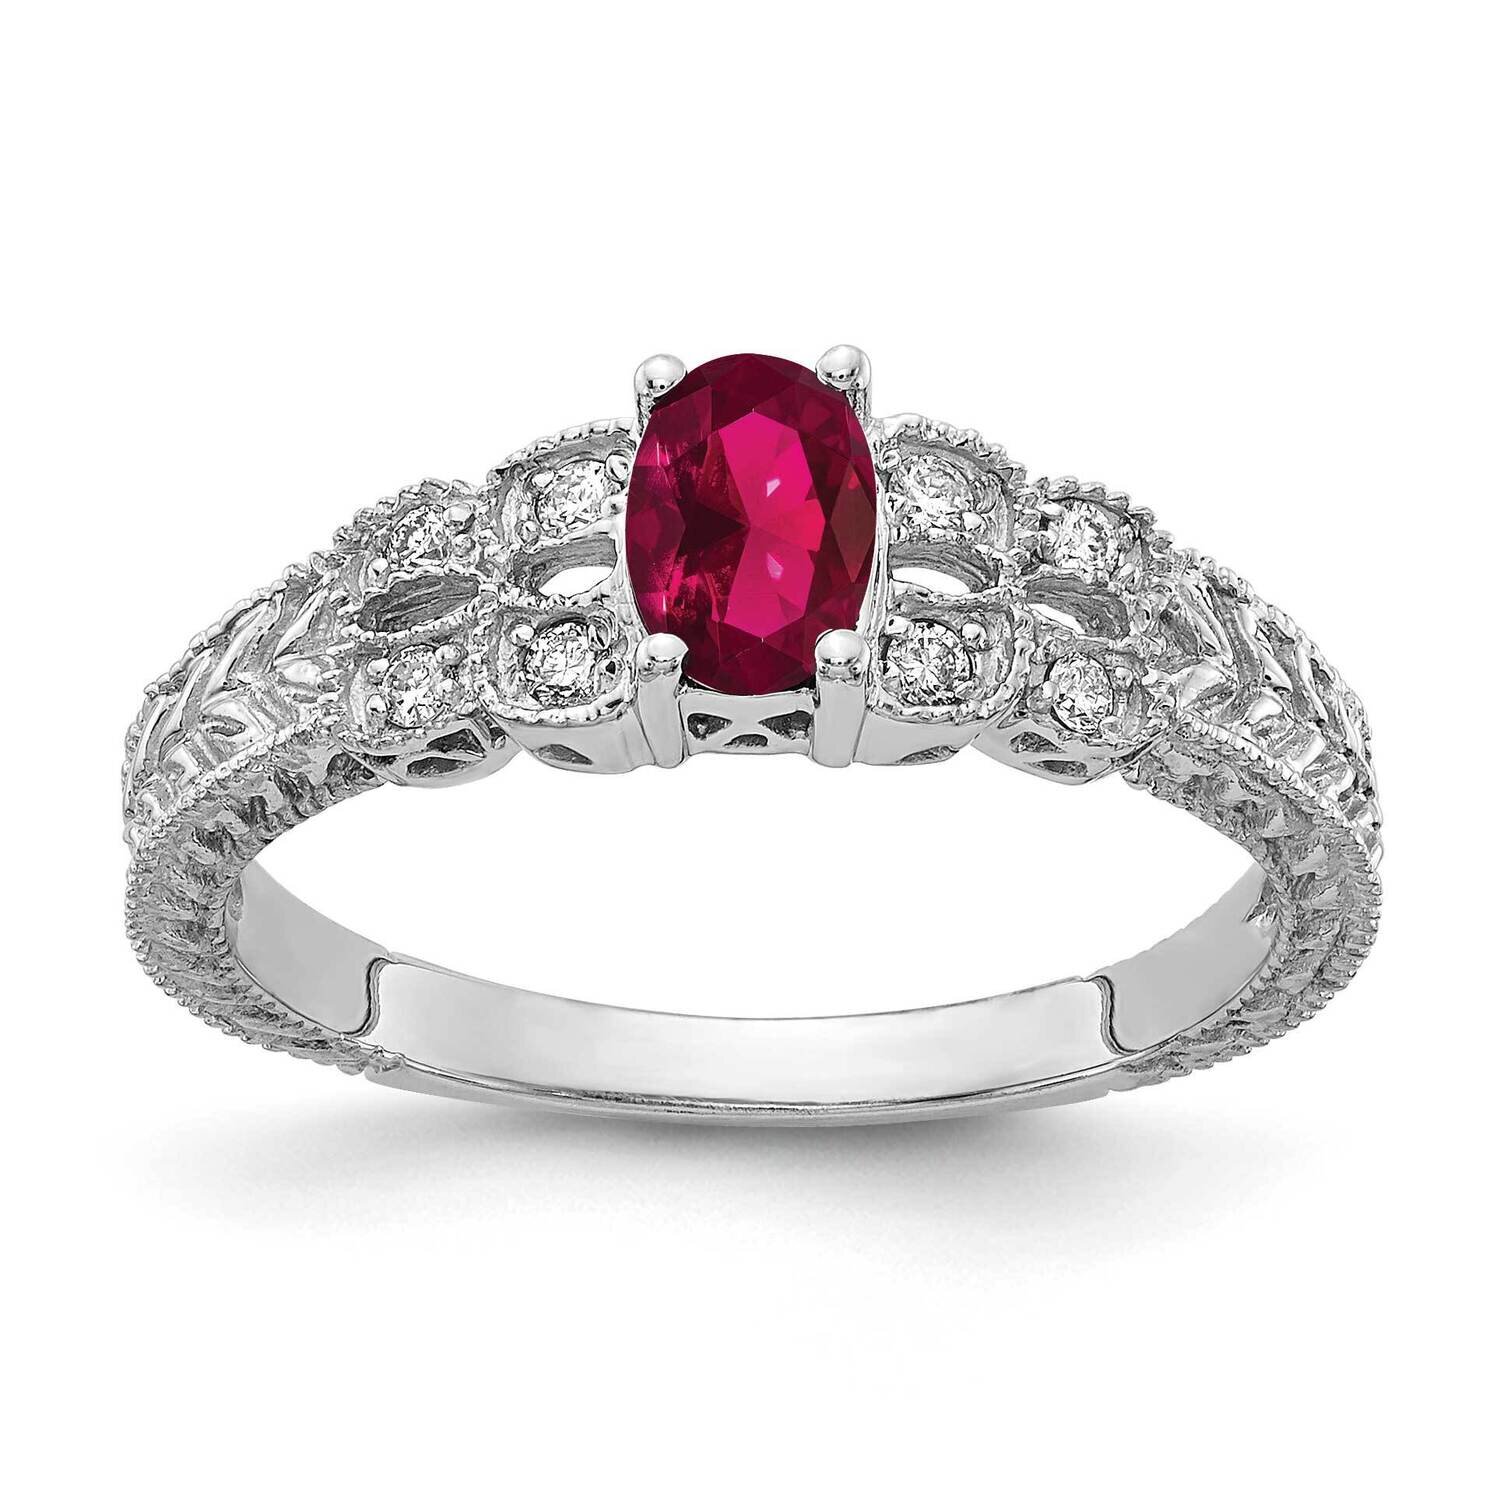 6x4mm Oval Created Ruby Aaa Diamond Ring 14k White Gold Y2065CR/AAA